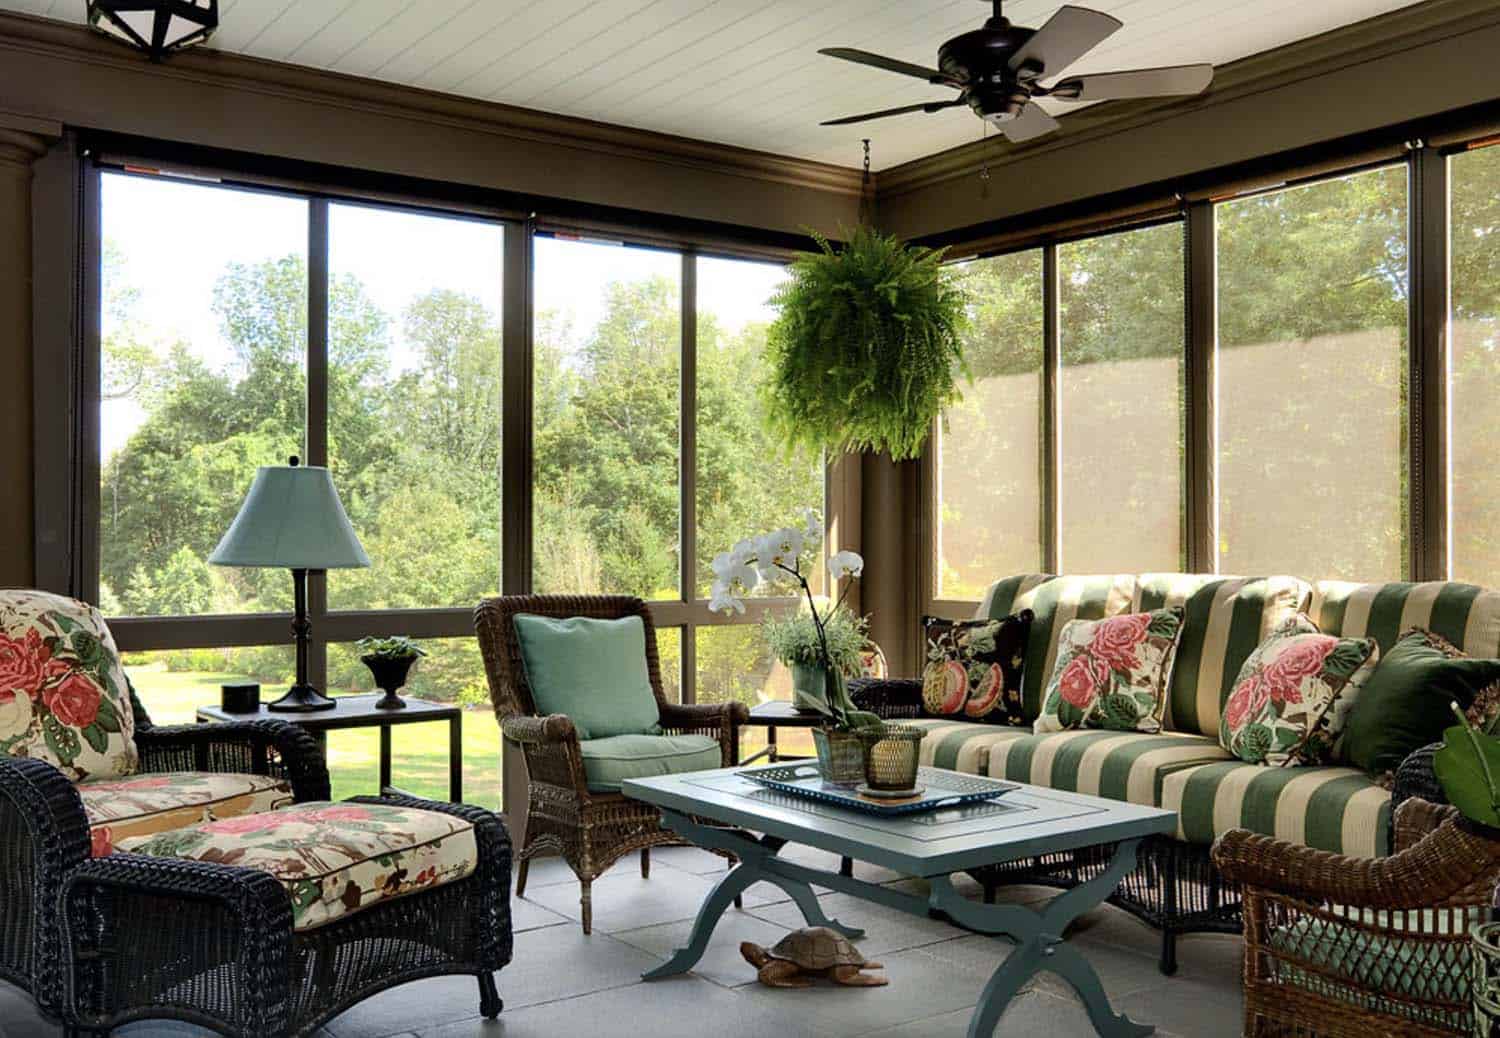 screened porch addition to a period home with wicker furniture and pops of color